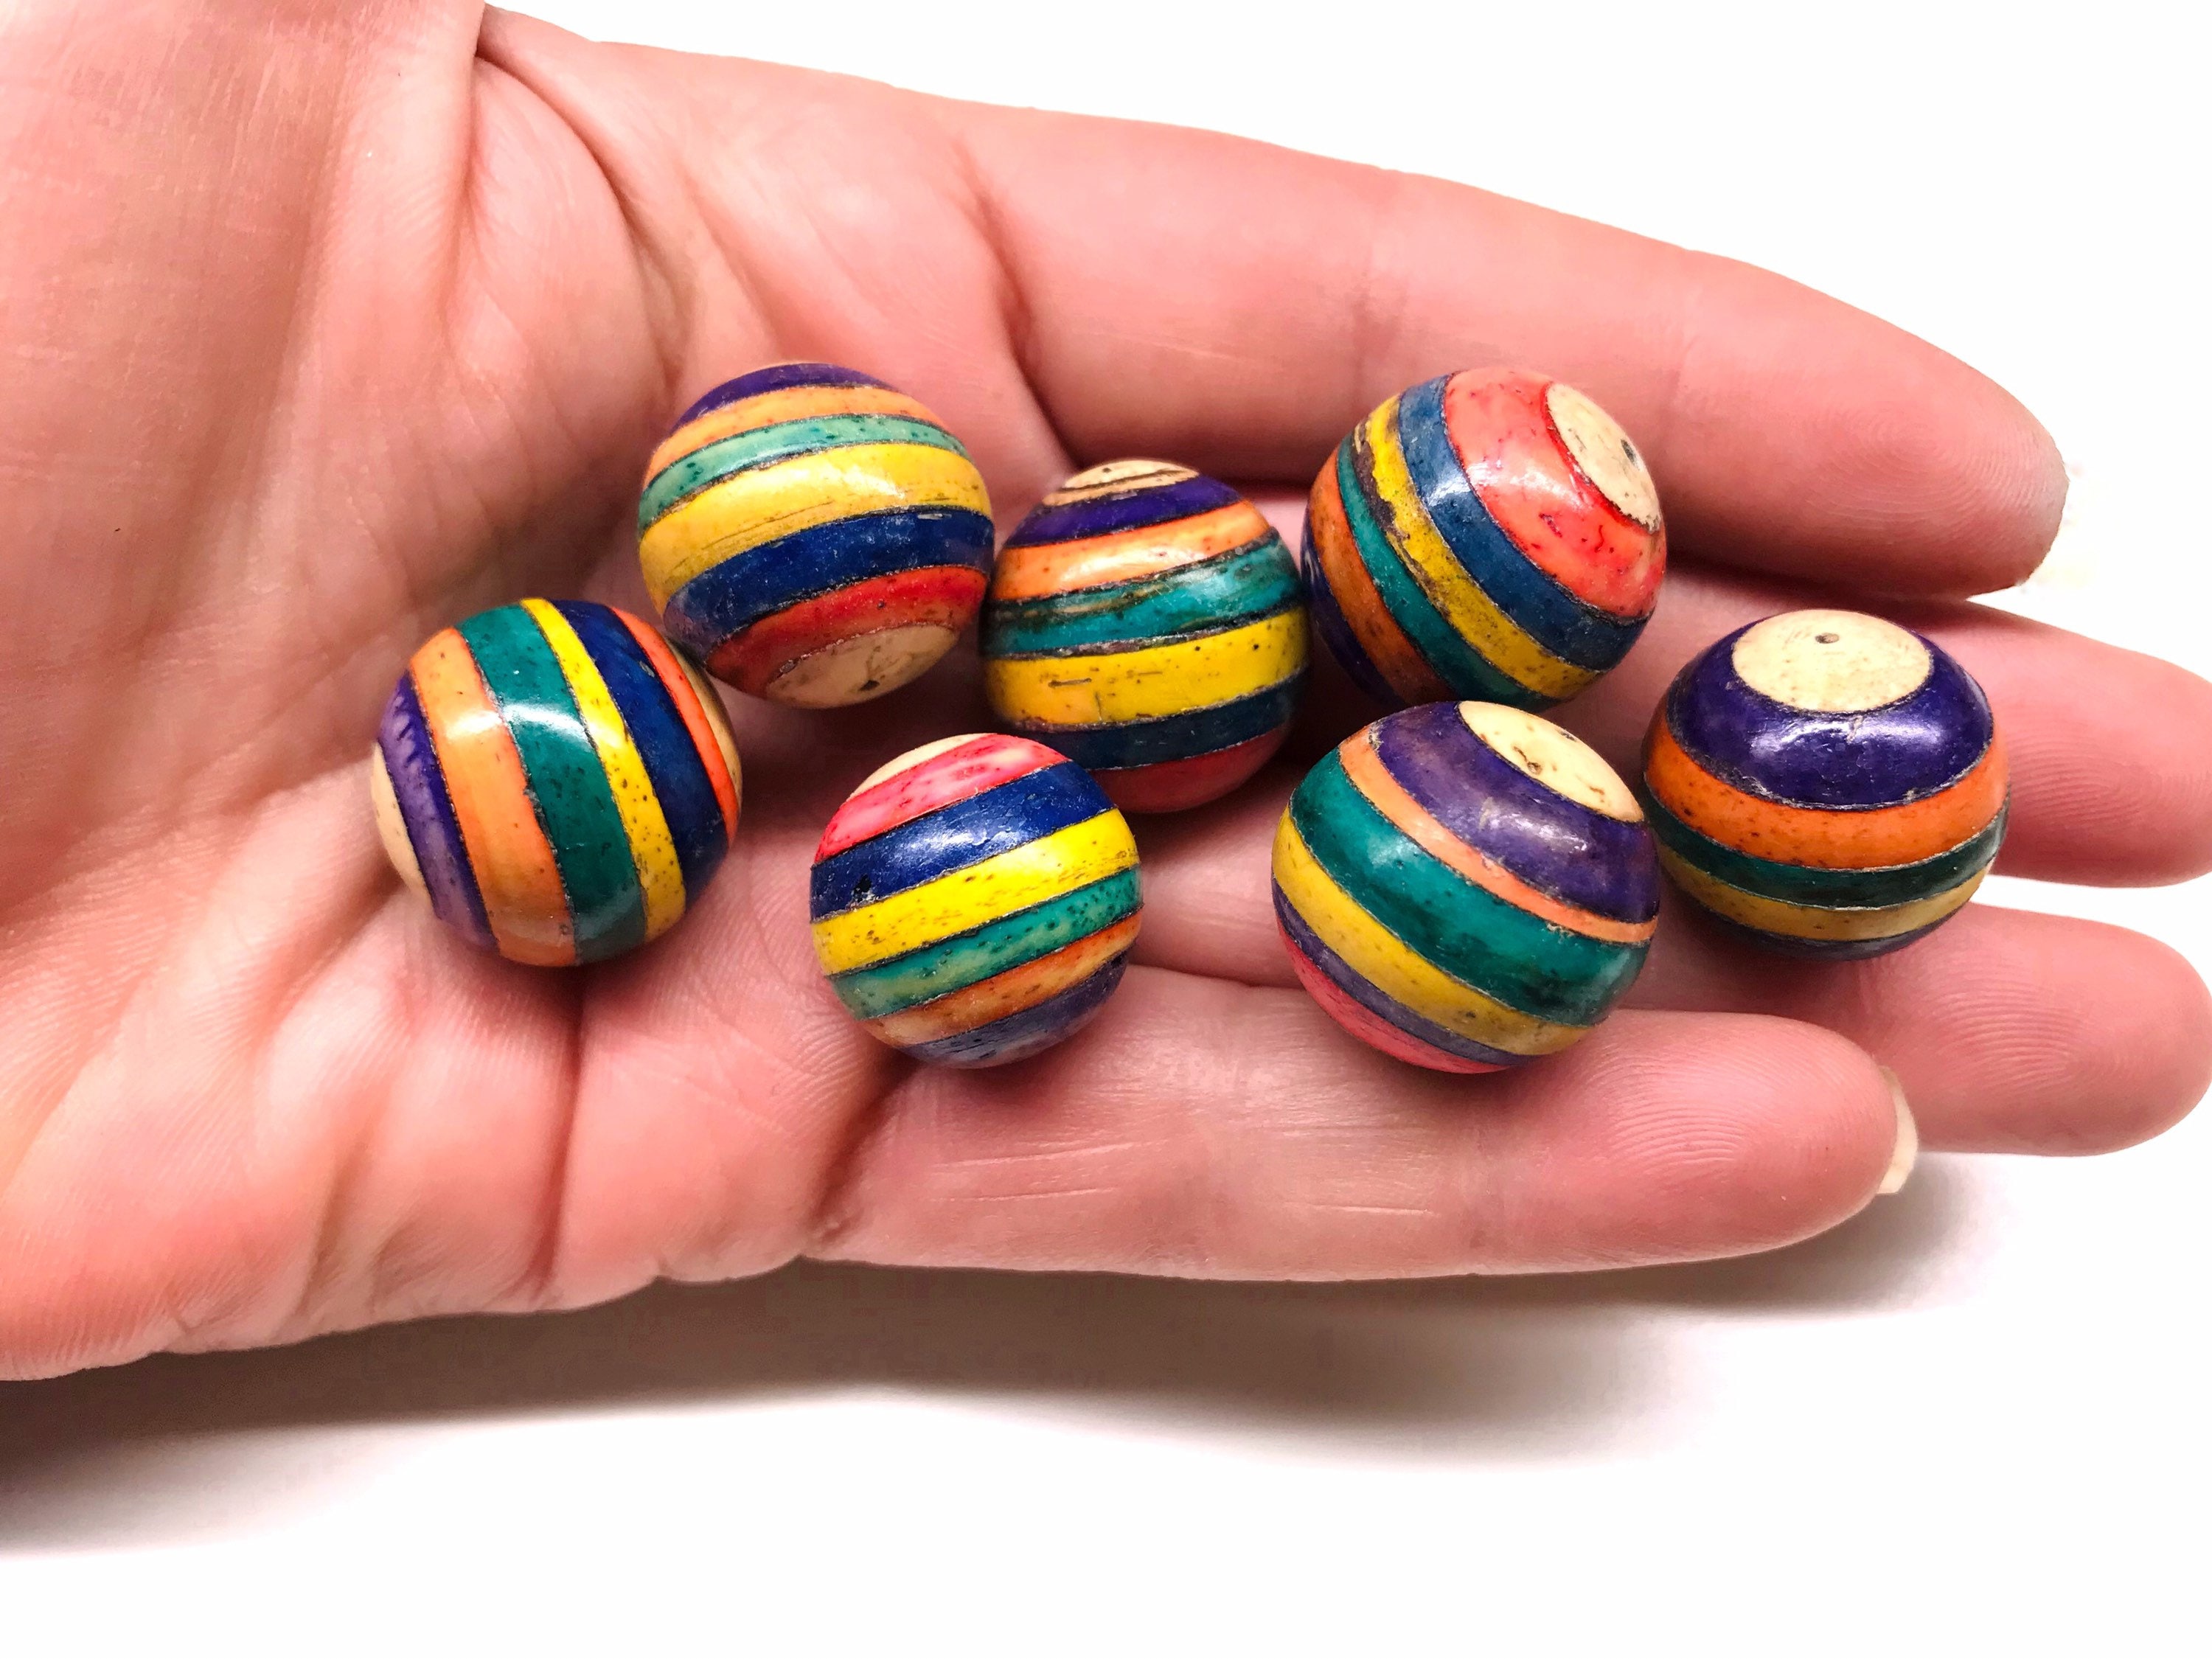 Rainbow Beads, Resin Beads, Colorful Striped Beads, Rainbow Beads, 6mm,  8mm, 12mm, Smooth Round, Necklace Beads, Beads, Jewelry Making, 25N 